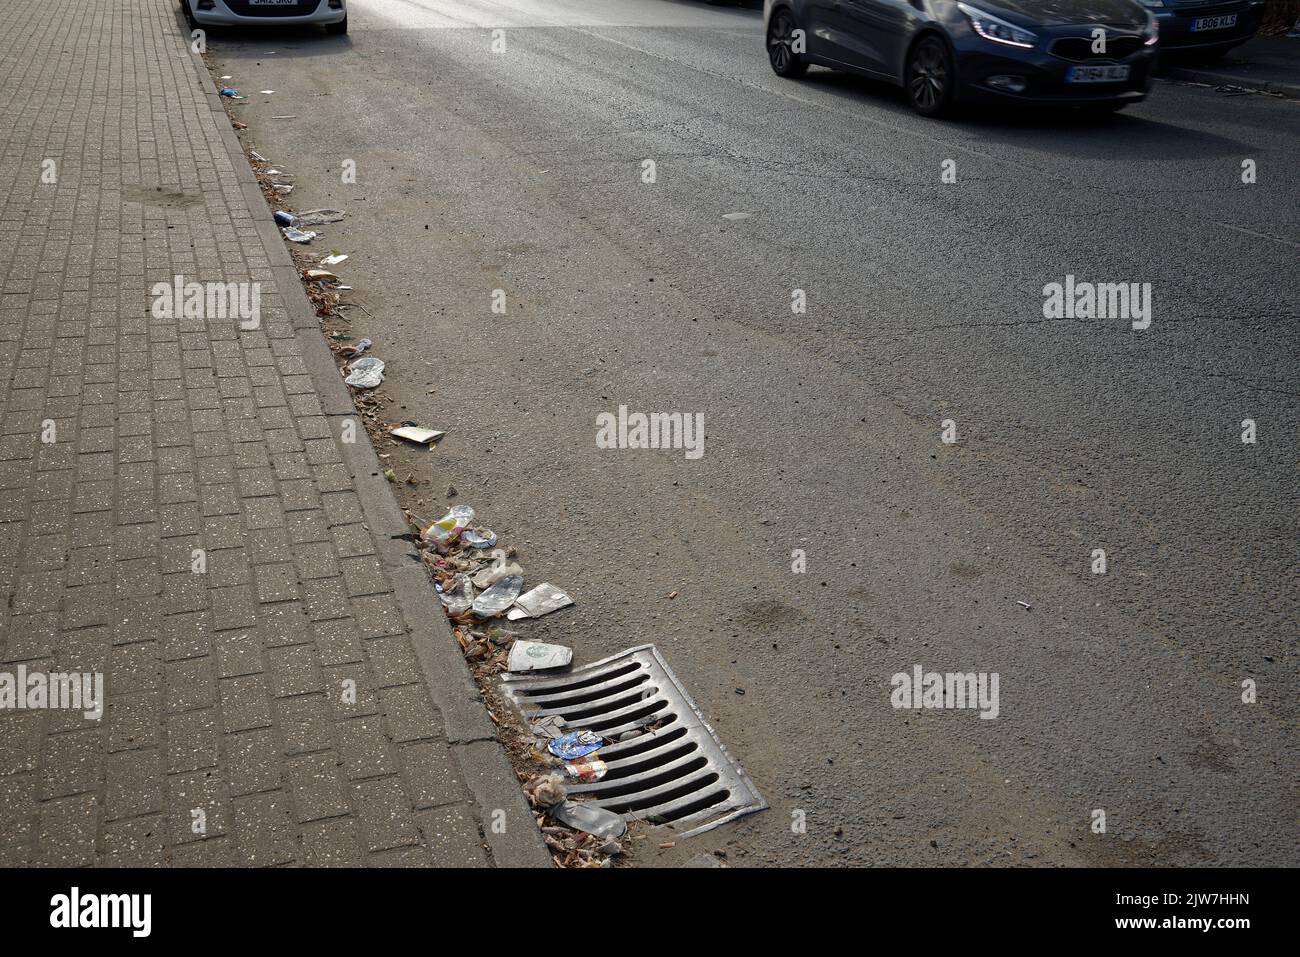 Rubbish or trash at the side of a road in London, England. An unattractive sight. An unhealthy environment. Stock Photo